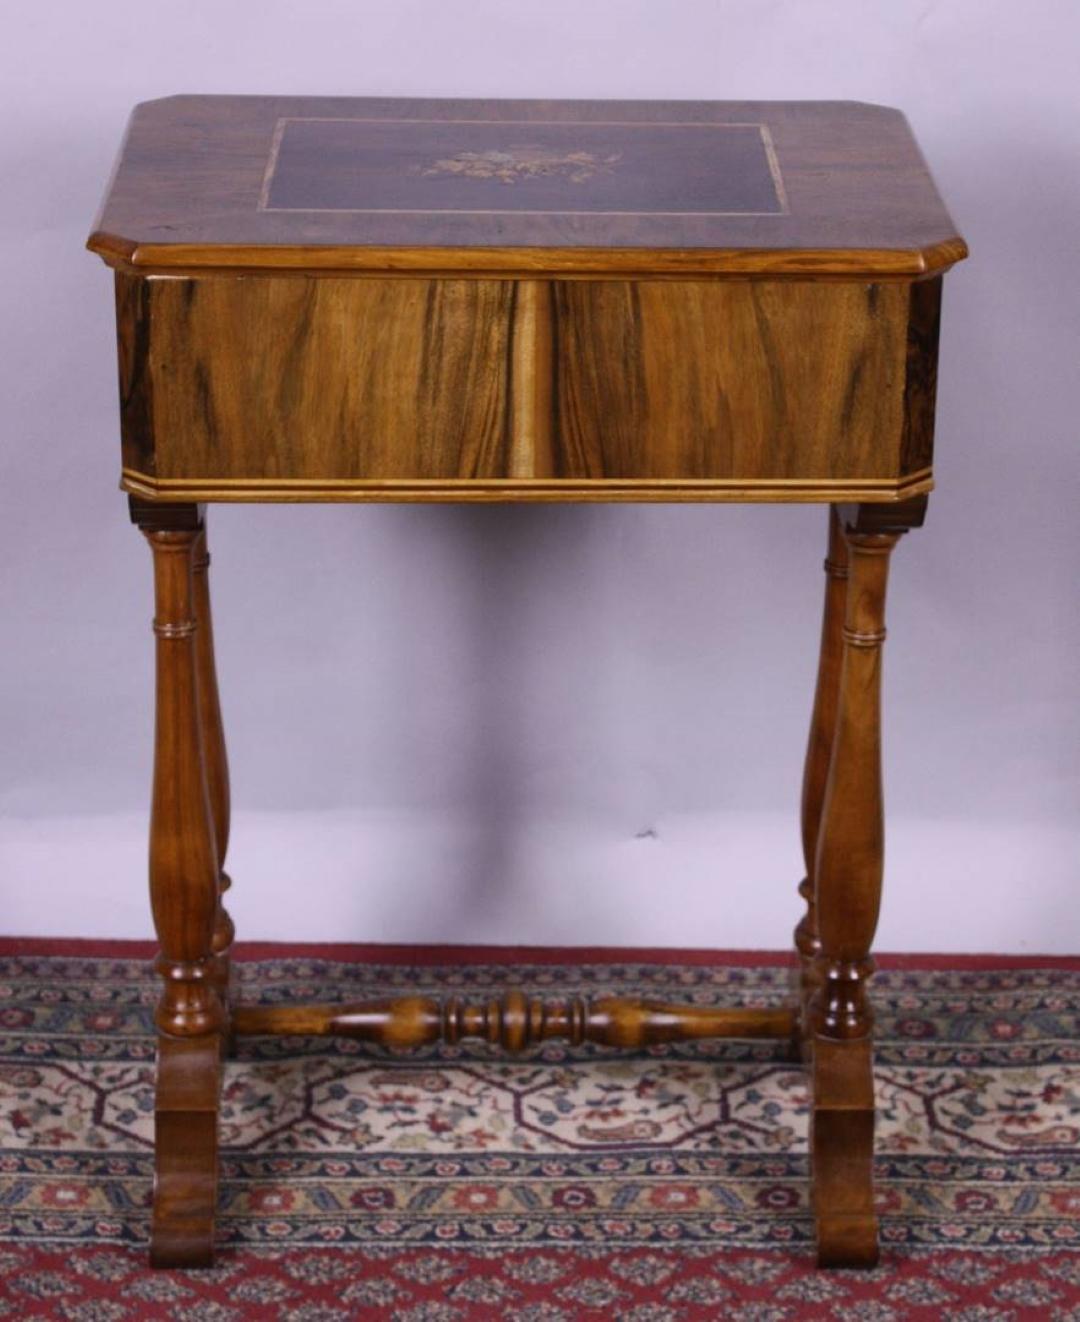 Wonderful petite sewing table or end table with stunning marquetry works on the tabletop. The inlay works show a fruit-bowl as well as a large bird sitting next to it and are made of different colored fruitwoods like apple, cherry and pear. The